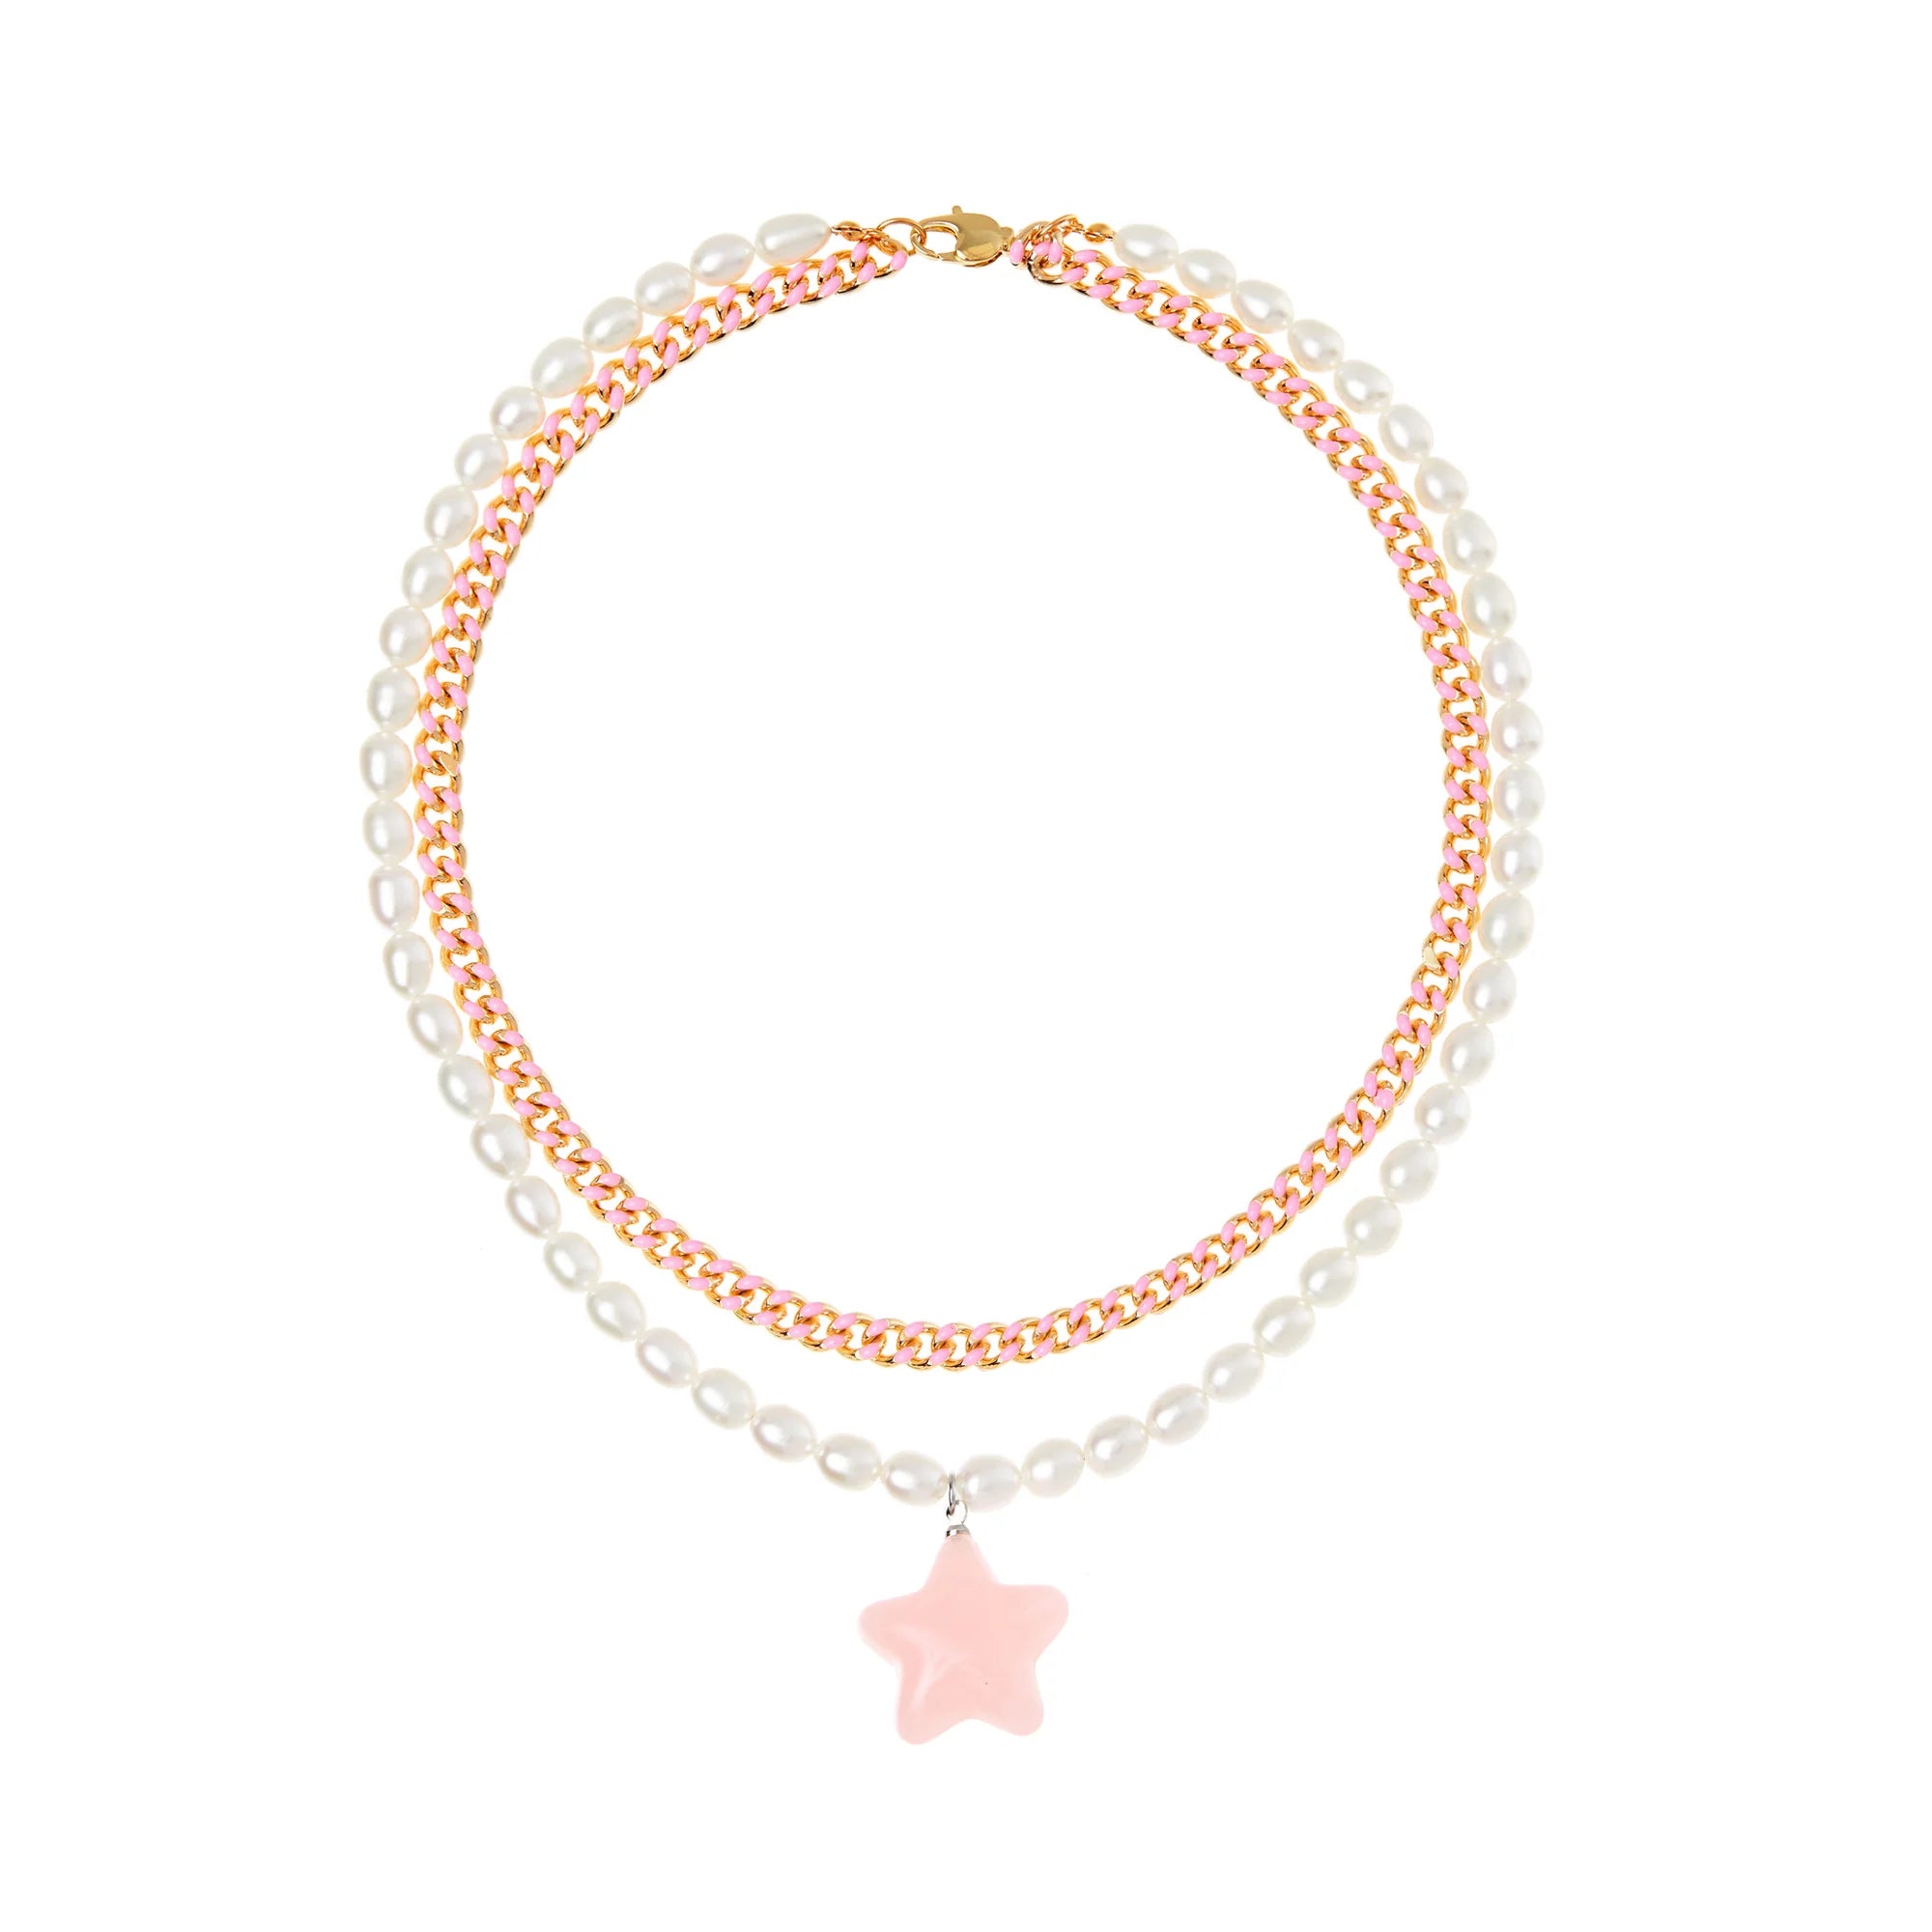 Necklace 'Neon Star' – Candy